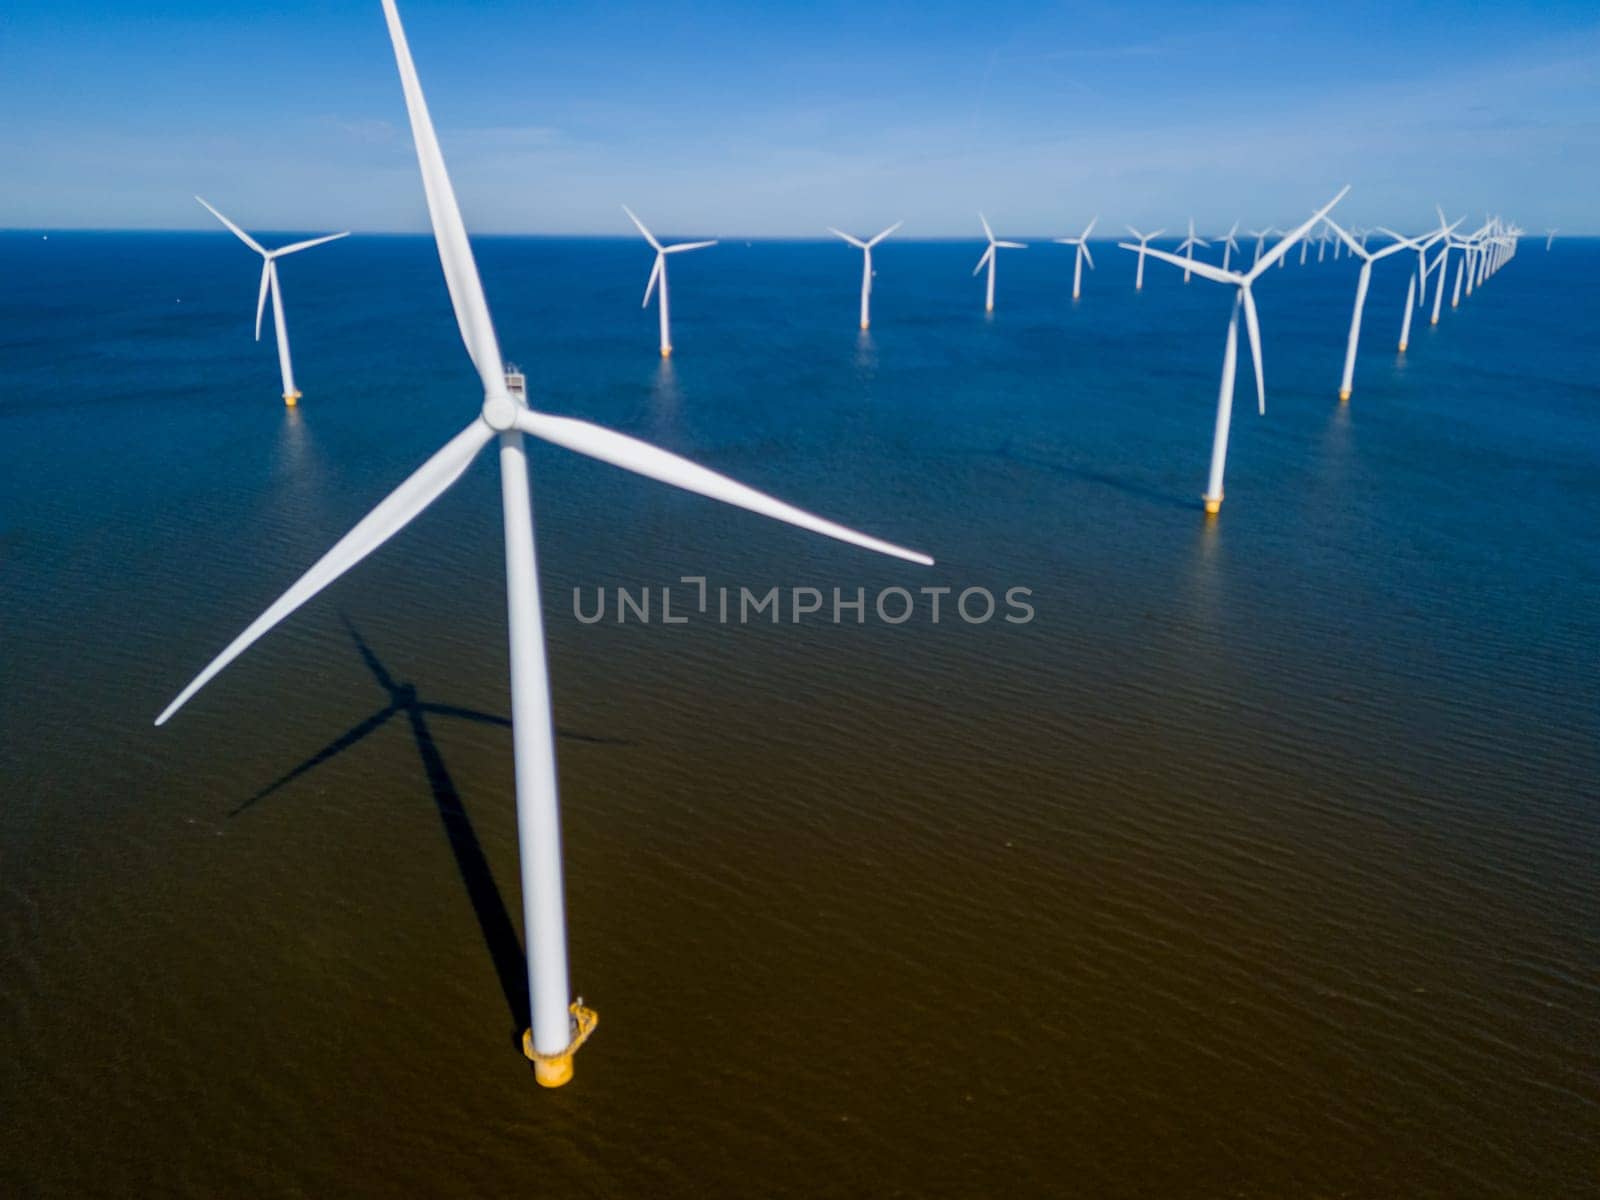 A group of majestic wind turbines standing tall in the ocean against a cloudy sky, harnessing the power of the wind to generate sustainable energy. drone aerial view of windmill turbines